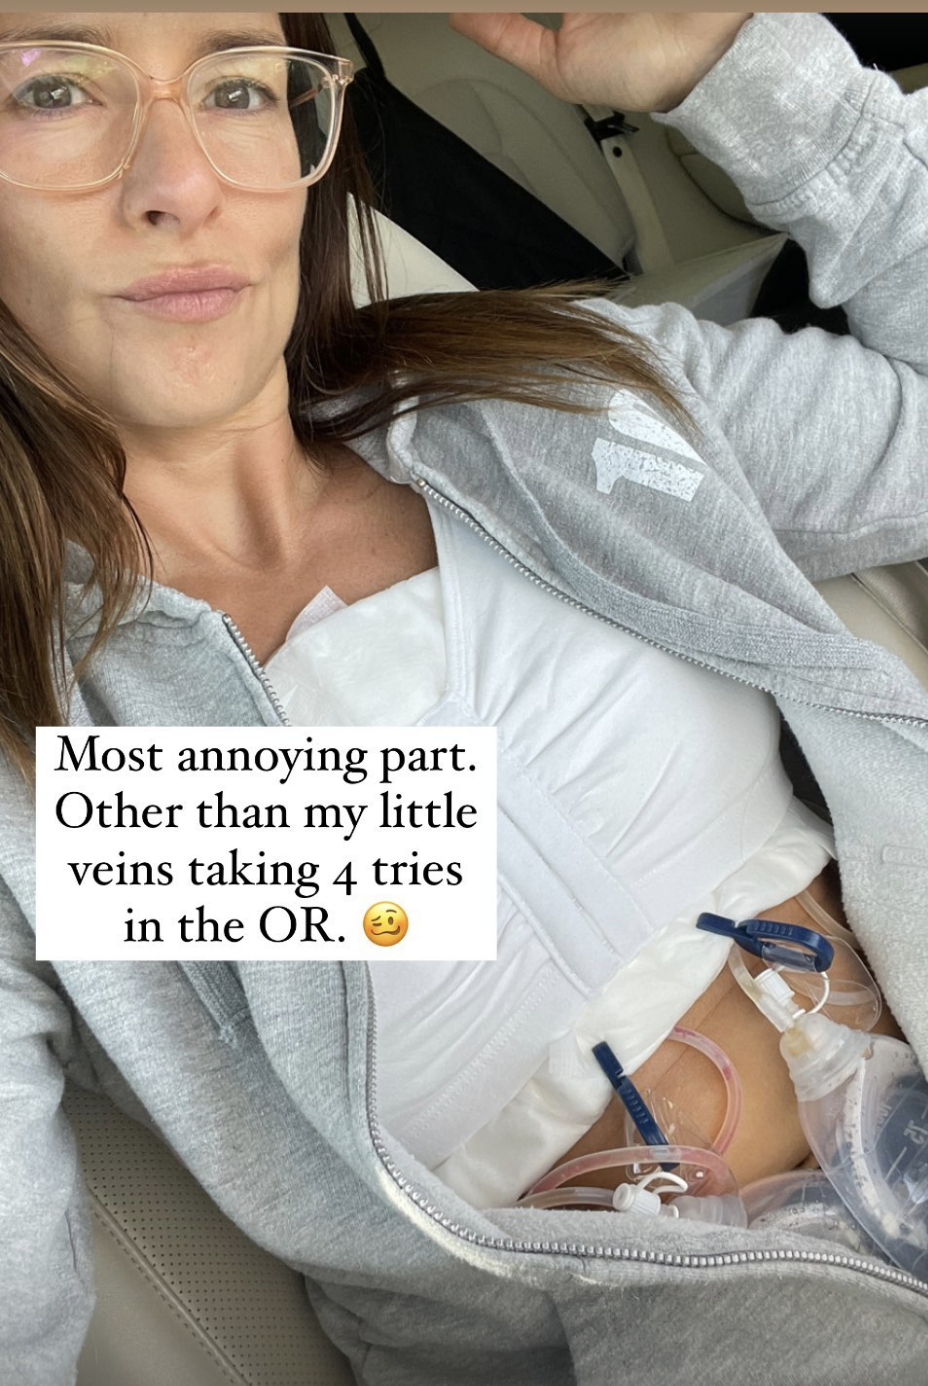 <p><span>Danica Patrick revealed in a lengthy Instagram <a href="https://www.instagram.com/p/Cc8HQGNruIJ/">post</a> in April 2022 that she'd just had her breast implants removed -- and within hours, she'd already started to feel better. "The condition that is not universally recognized is called breast implant illness. Leave it up to the good folks at these drug companies who are selling them to say they are safe. Look it up if you are struggling or know someone that is. The common denominator is you have conditions that can't be resolved. For me this is true. I have tried 3 drs and 6-8 levels of thyroid meds, a 90 day gut protocol, and chelation to get rid of heavy metals and up to 30 pills a day.... with no resolution. I haven't felt or looked any different," she explained. "There are a host of issues that women have dealt with and I have many, but not all. After watching over 100 stories on YouTube.... my belief is, it's not if but when you develop symptoms. Some are right away, others are over 15 years later. Silicone is a foreign object and leaches chemicals (look up that huge list!) that's why the body produces a capsule around it." Danica concluded, "If this post helps just one get to the root of their issues, it did its job" and vowed to keep fans posted on her progress via social media. </span></p>